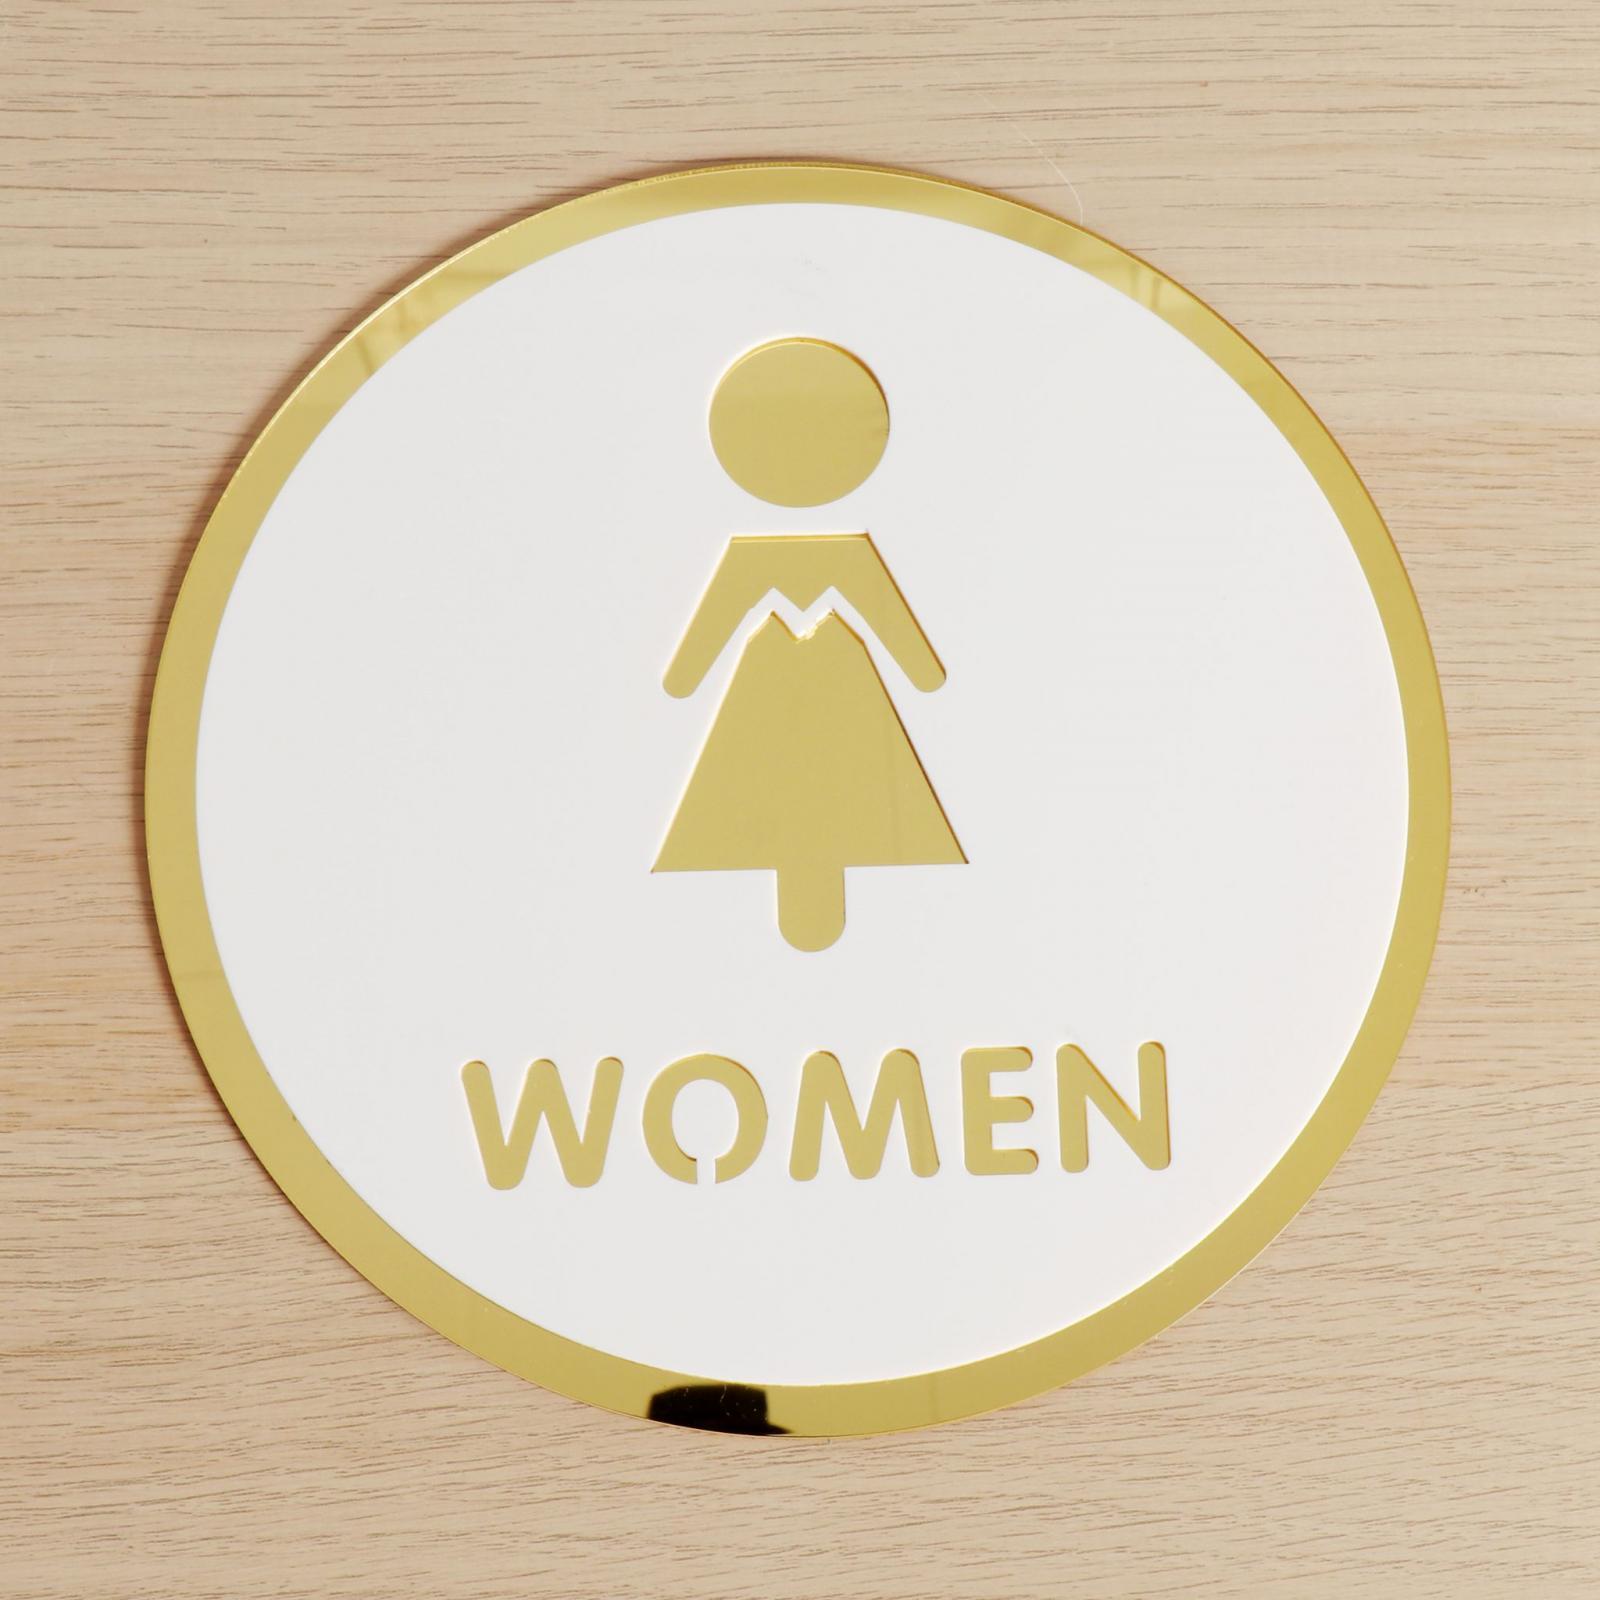 Toilet Sign Bathroom Signage Acrylic Bathroom Sign for Store Office Business